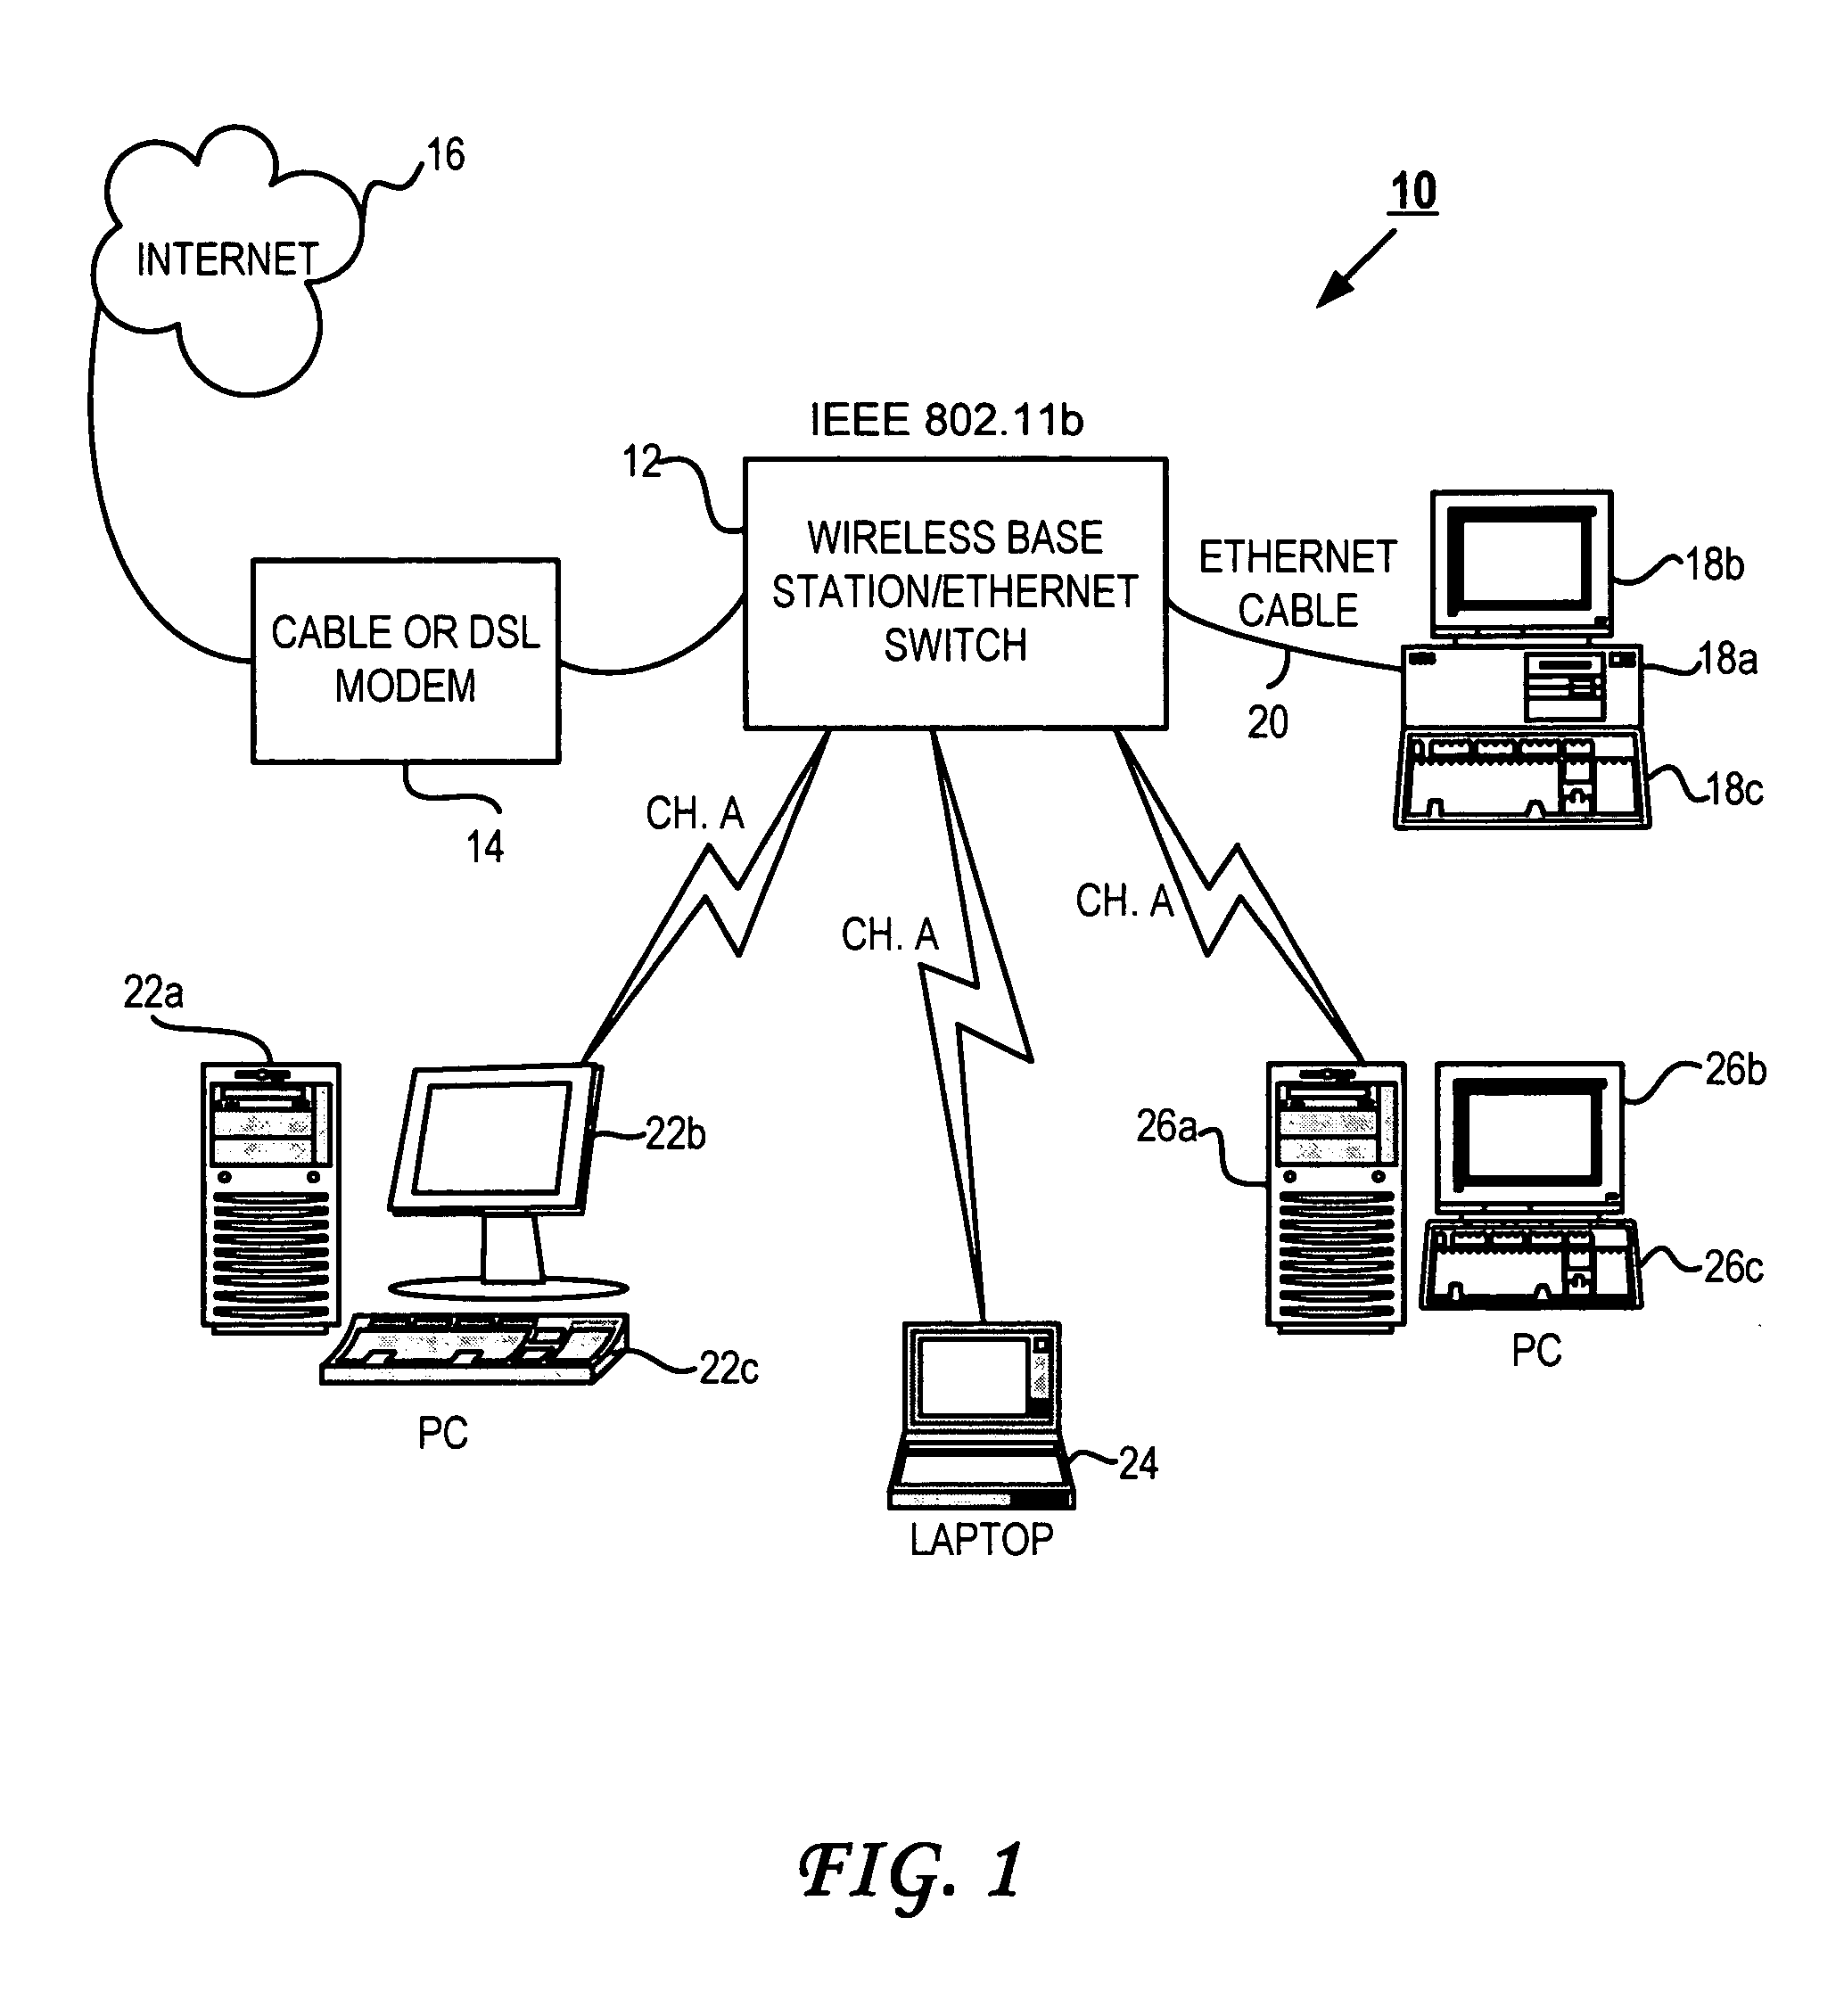 Method and system for securing and monitoring a wireless network